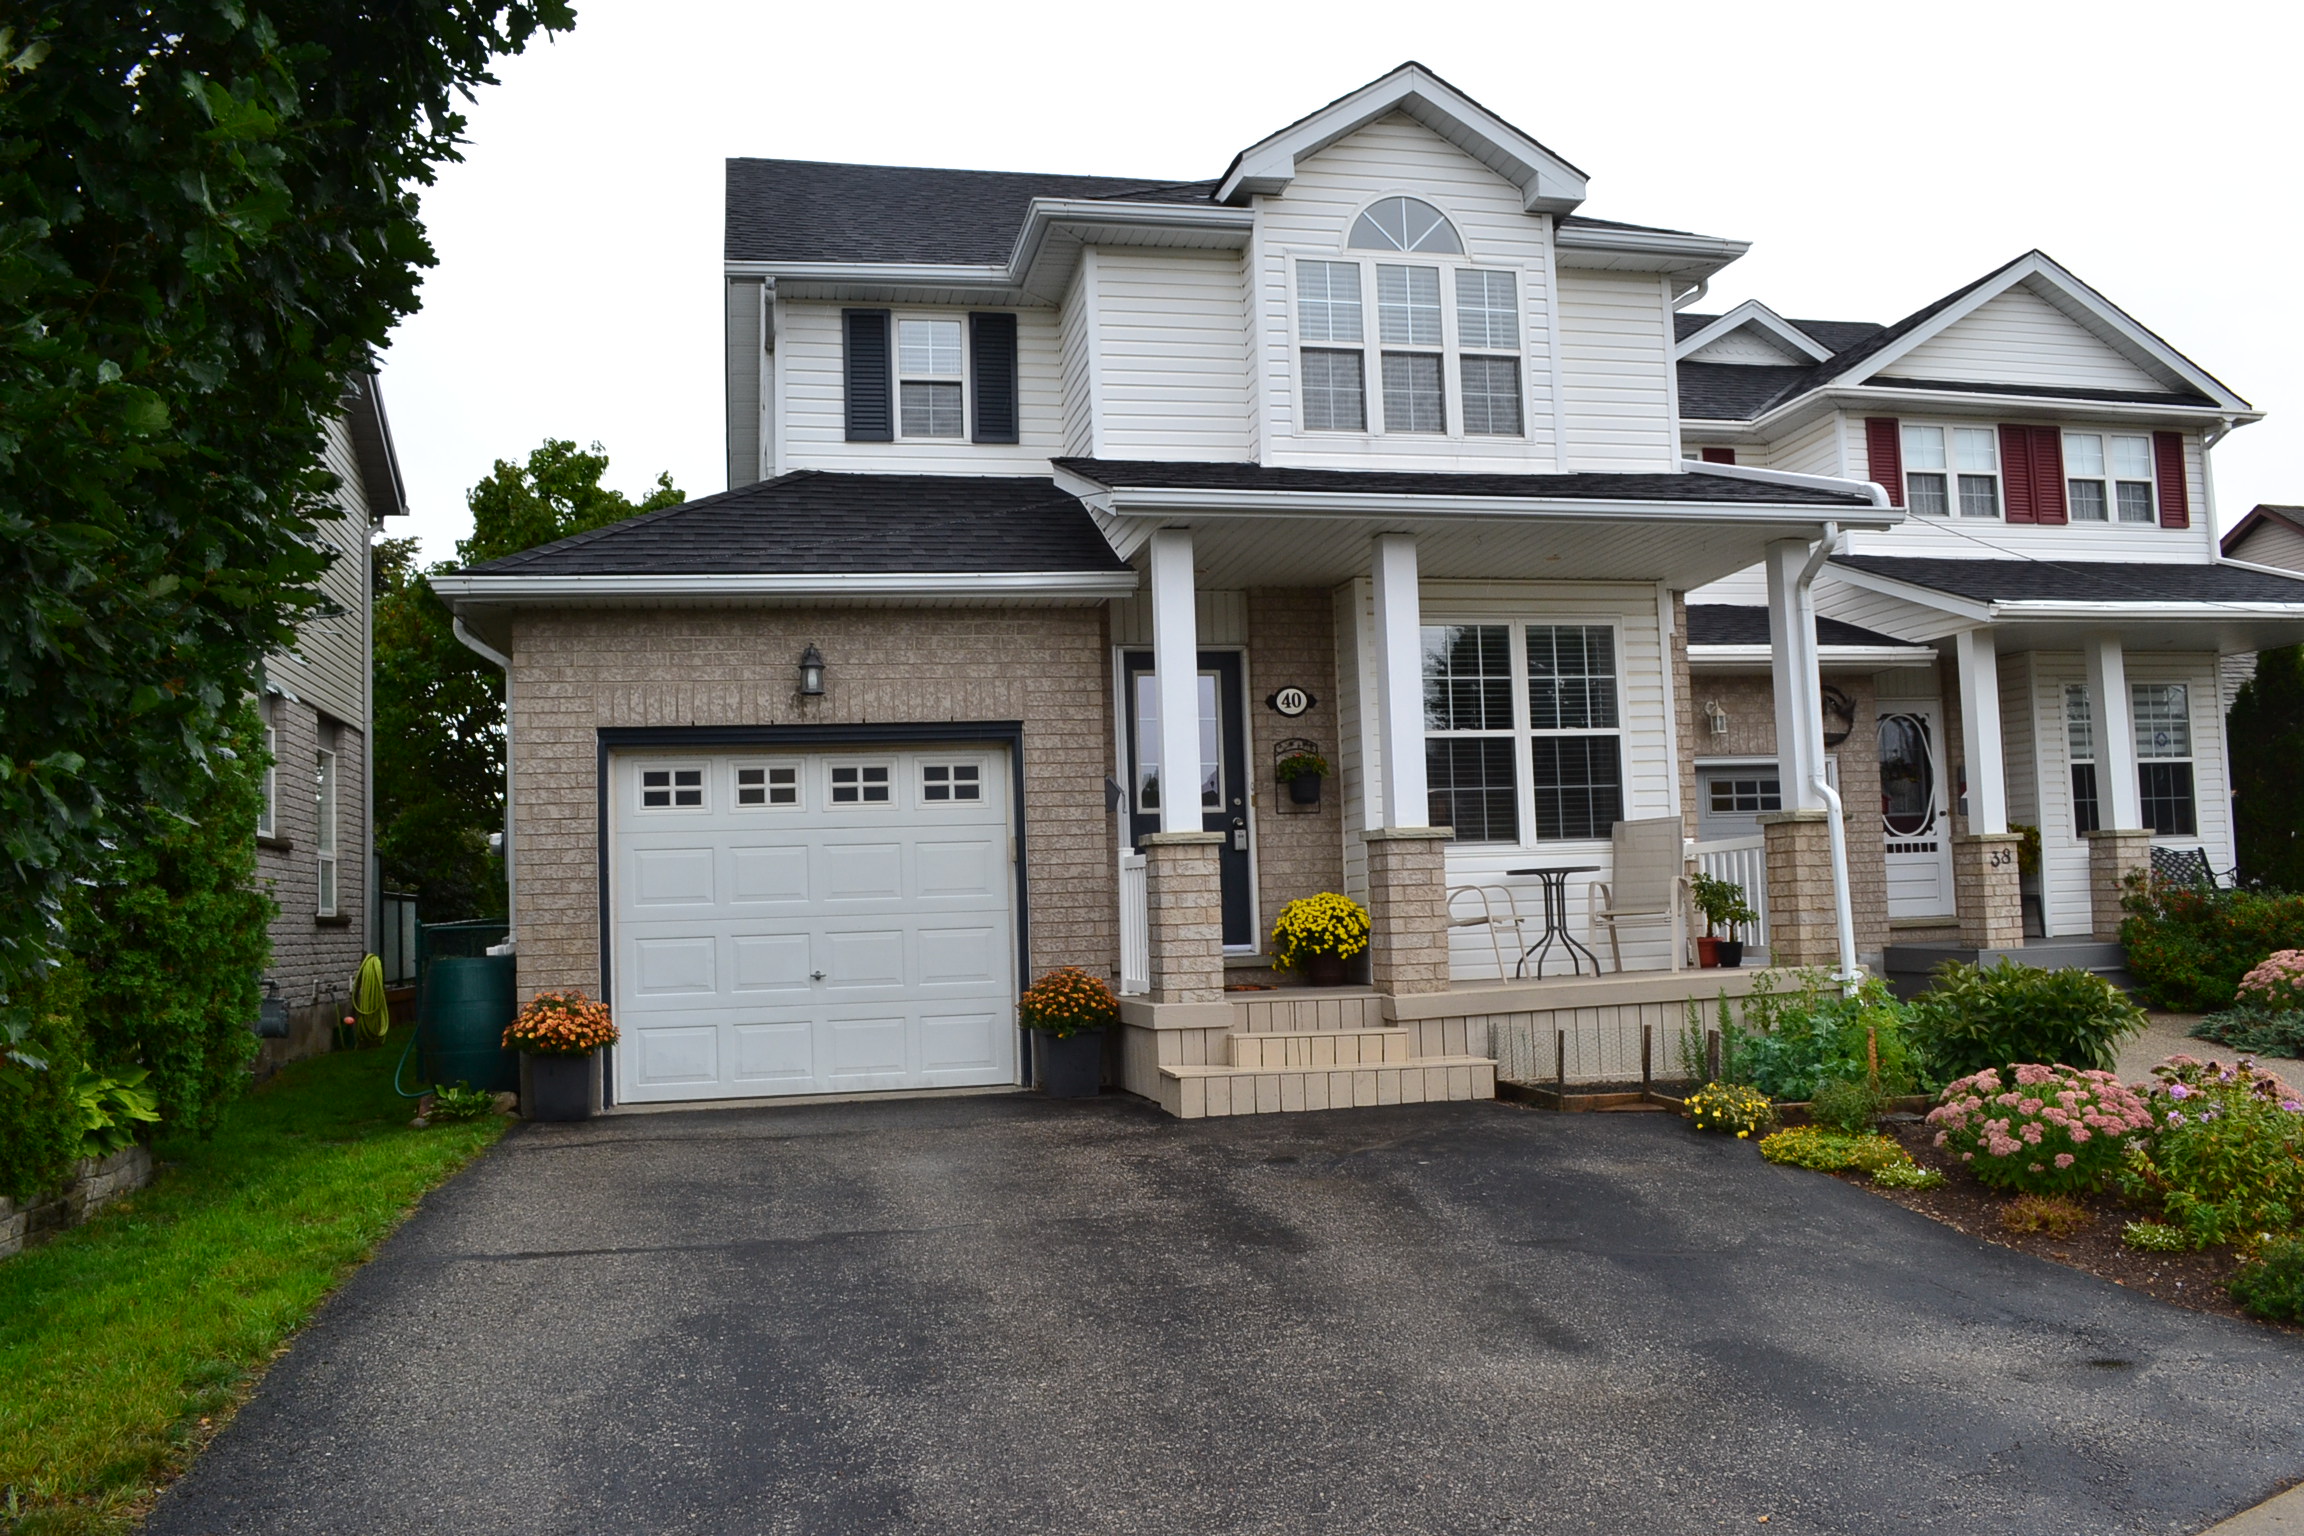 Picture of a property/building at 40 Bristow Creek Dr..